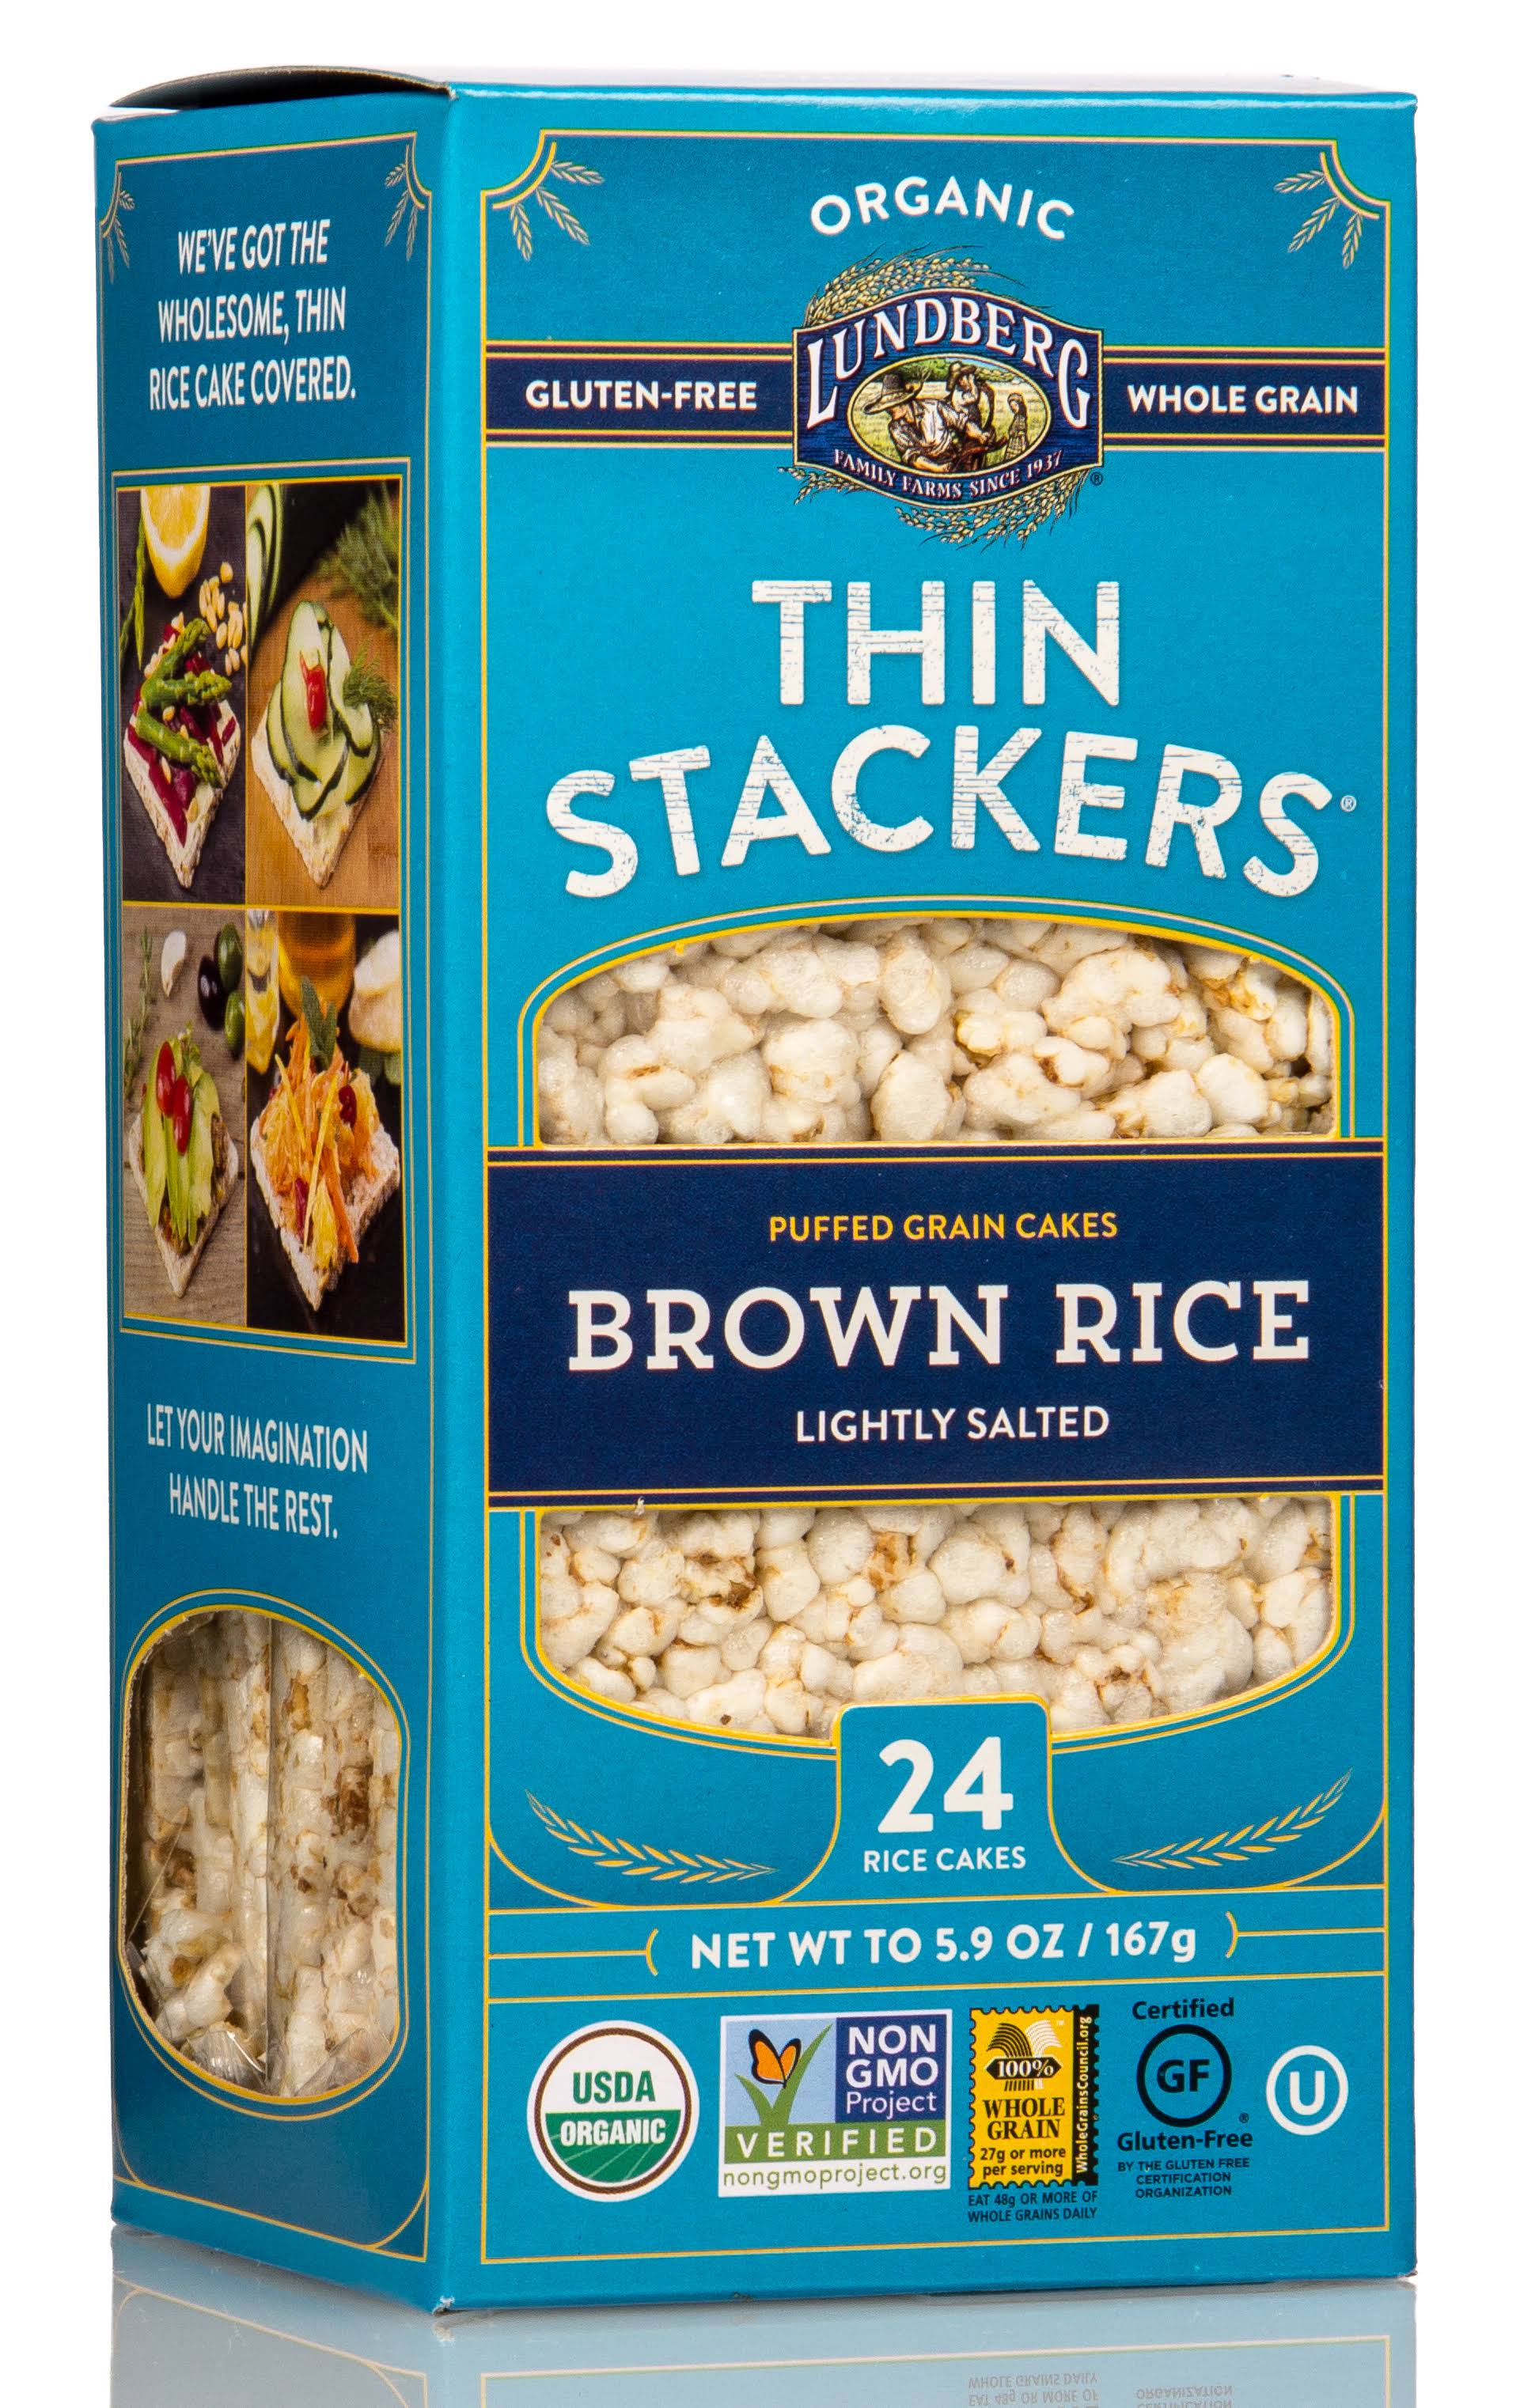 Lundberg Family Farms Thin Stackers Rice Cakes, Organic, Lightly Salted, Brown Rice - 24 rice cakes, 6 oz